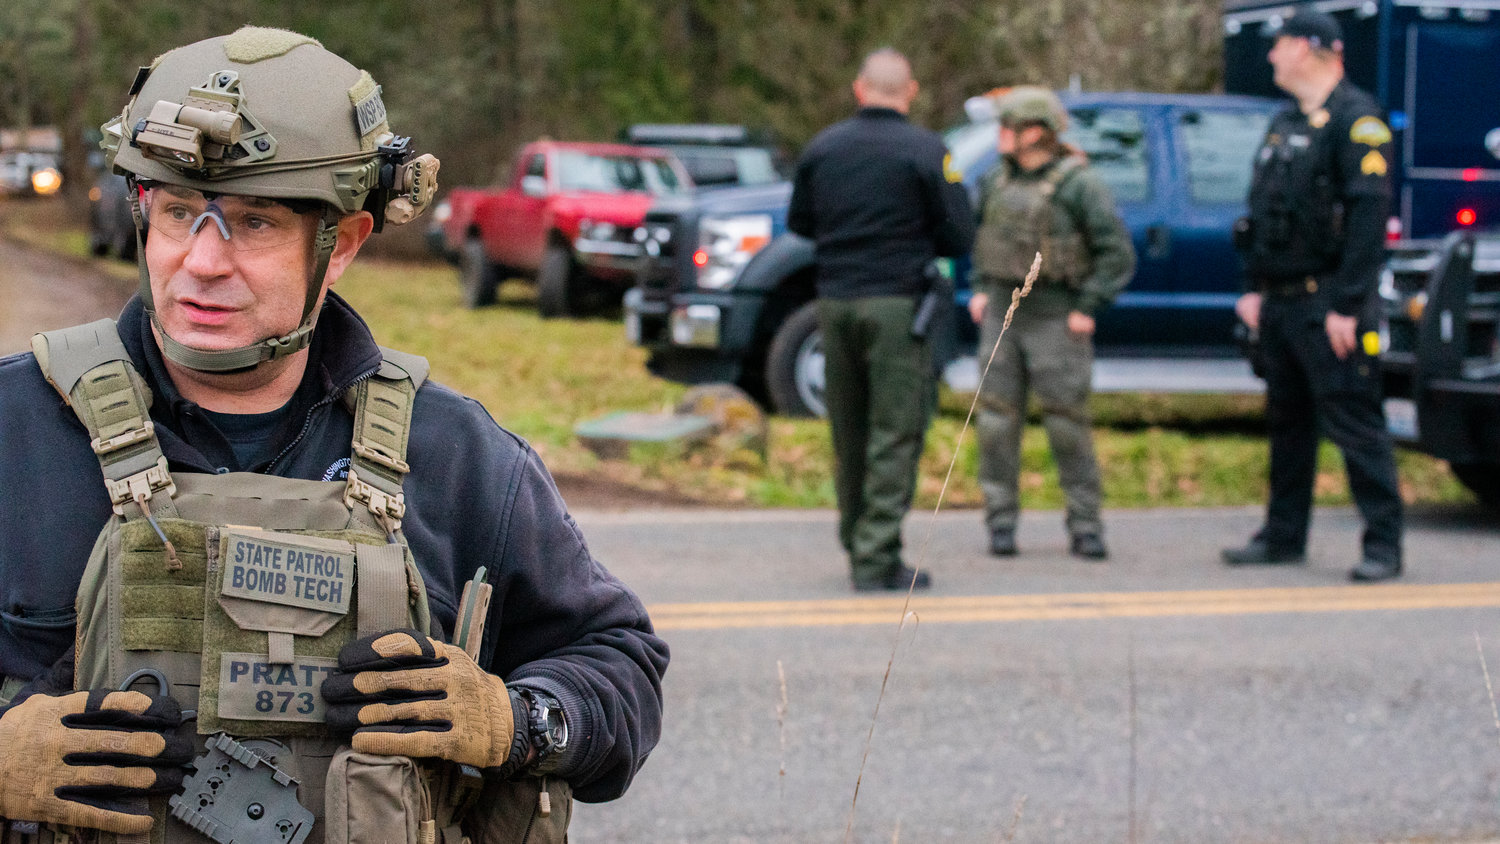 Washington State Patrol Bomb Squad Commander Clifford Pratt describes how responders are working to safely clear a Yelm residence of potentially dangerous materials by means of detonation in the 20000 block of Neat Road Southeast Tuesday afternoon.